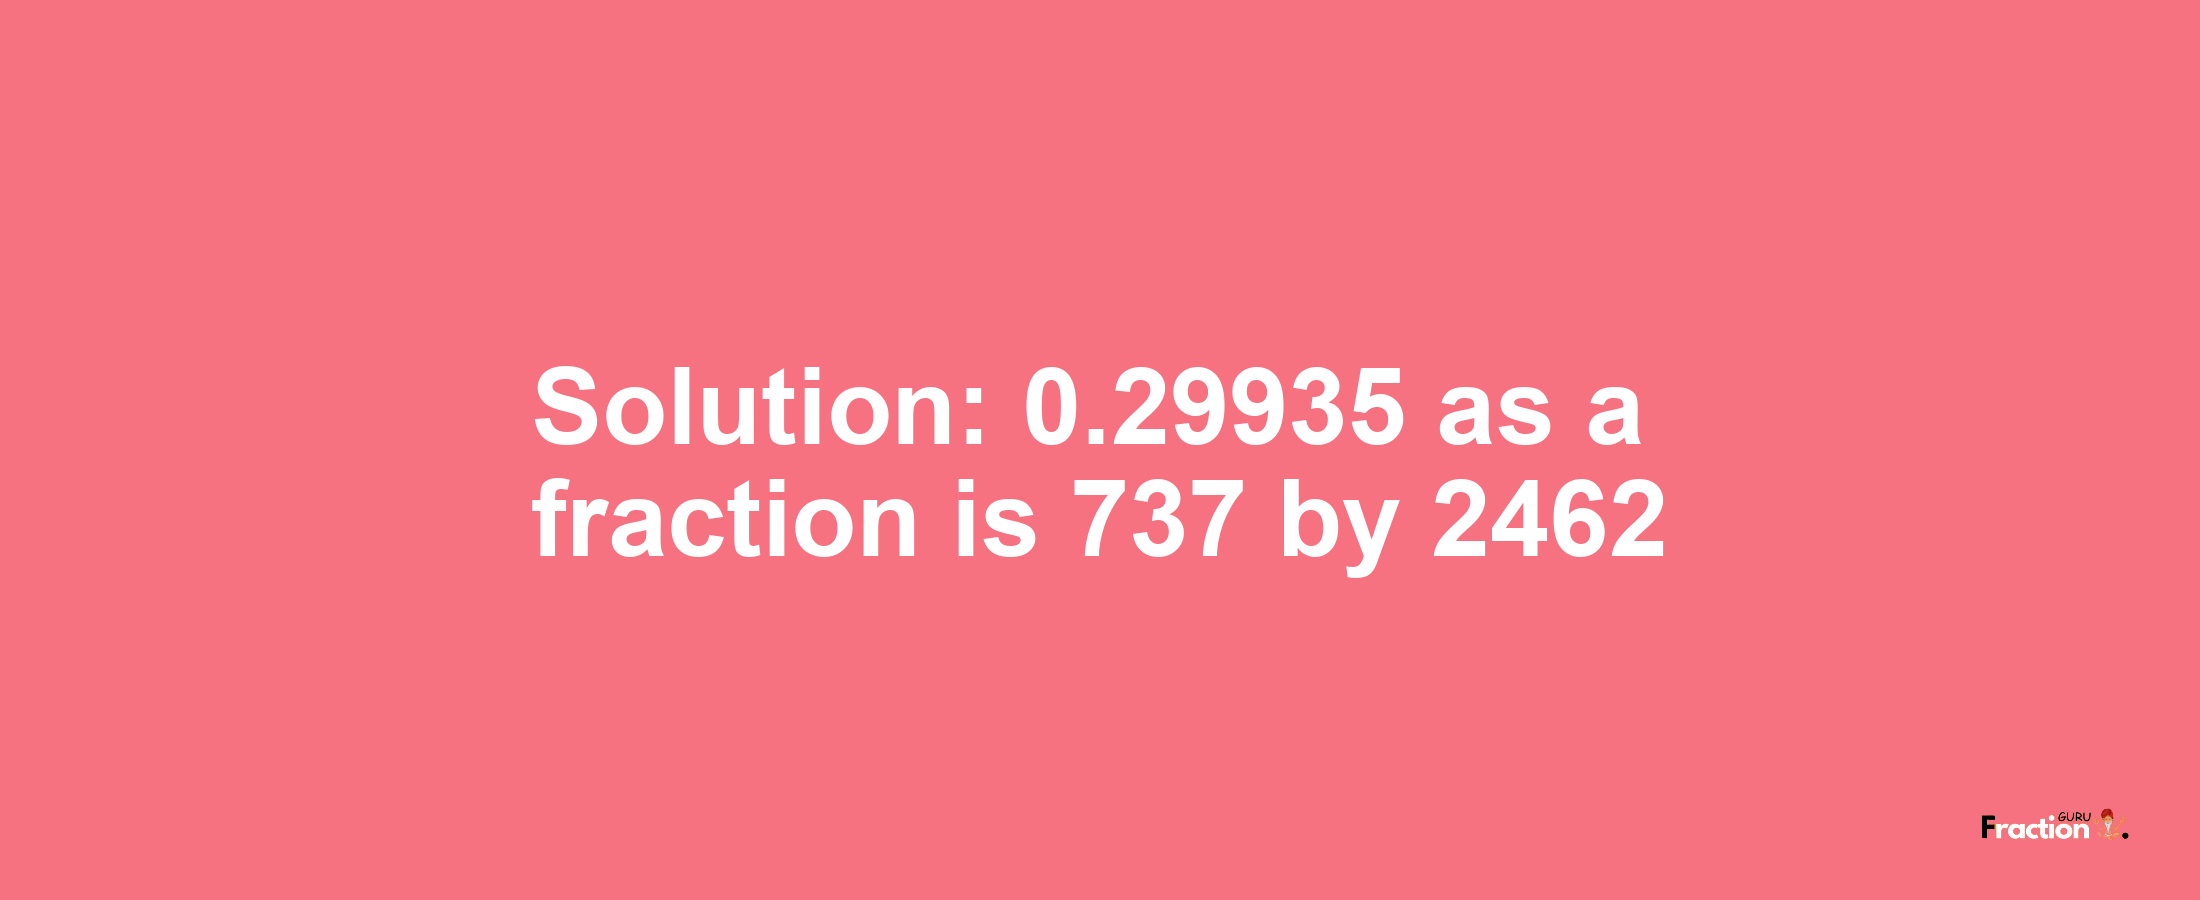 Solution:0.29935 as a fraction is 737/2462